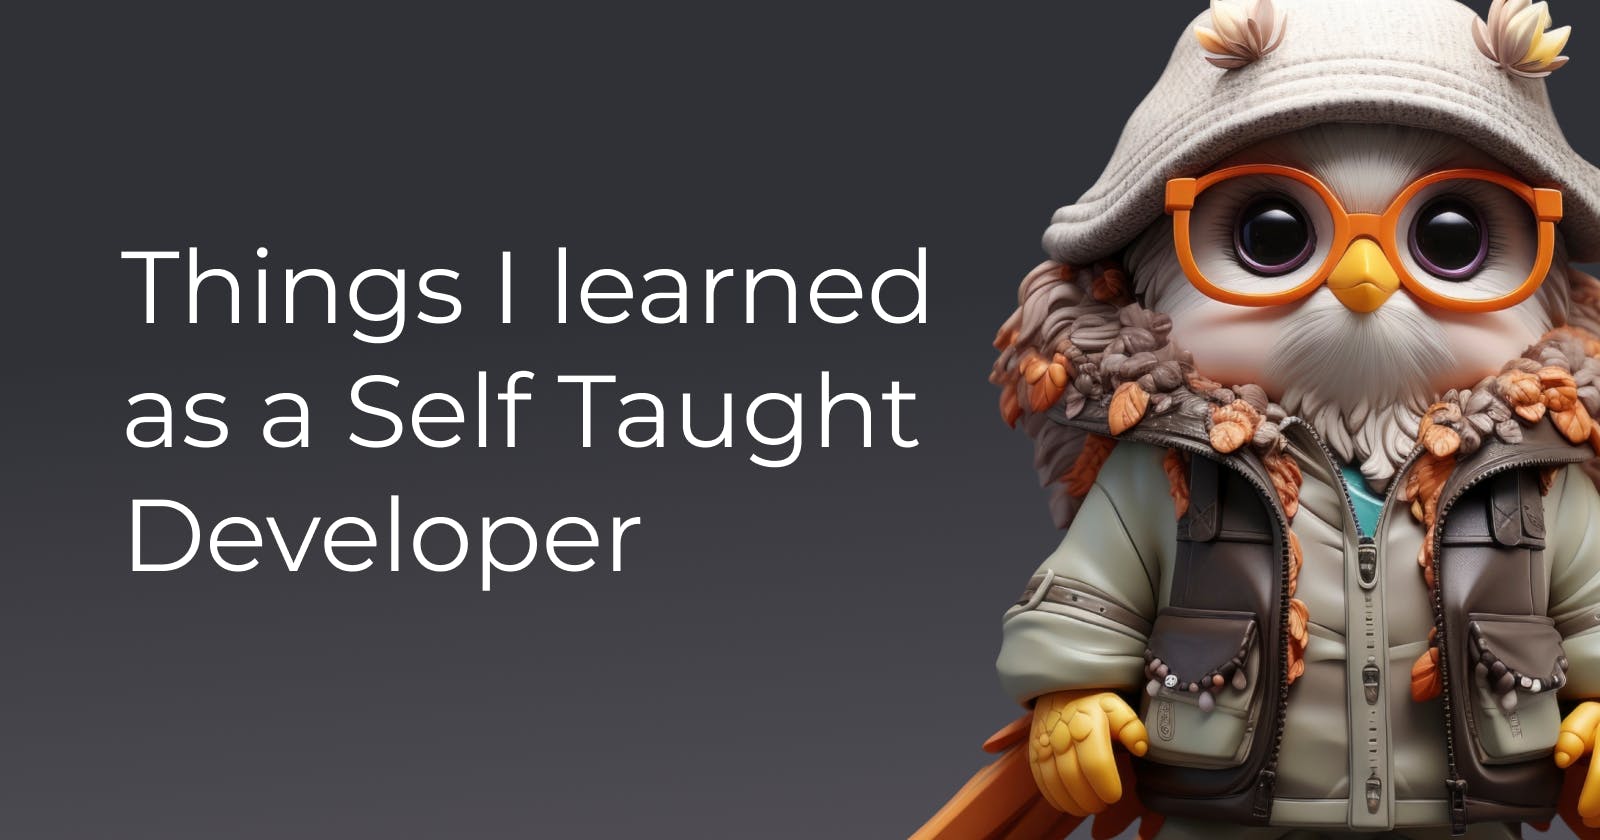 Lessons I learned as a Self Taught Developer